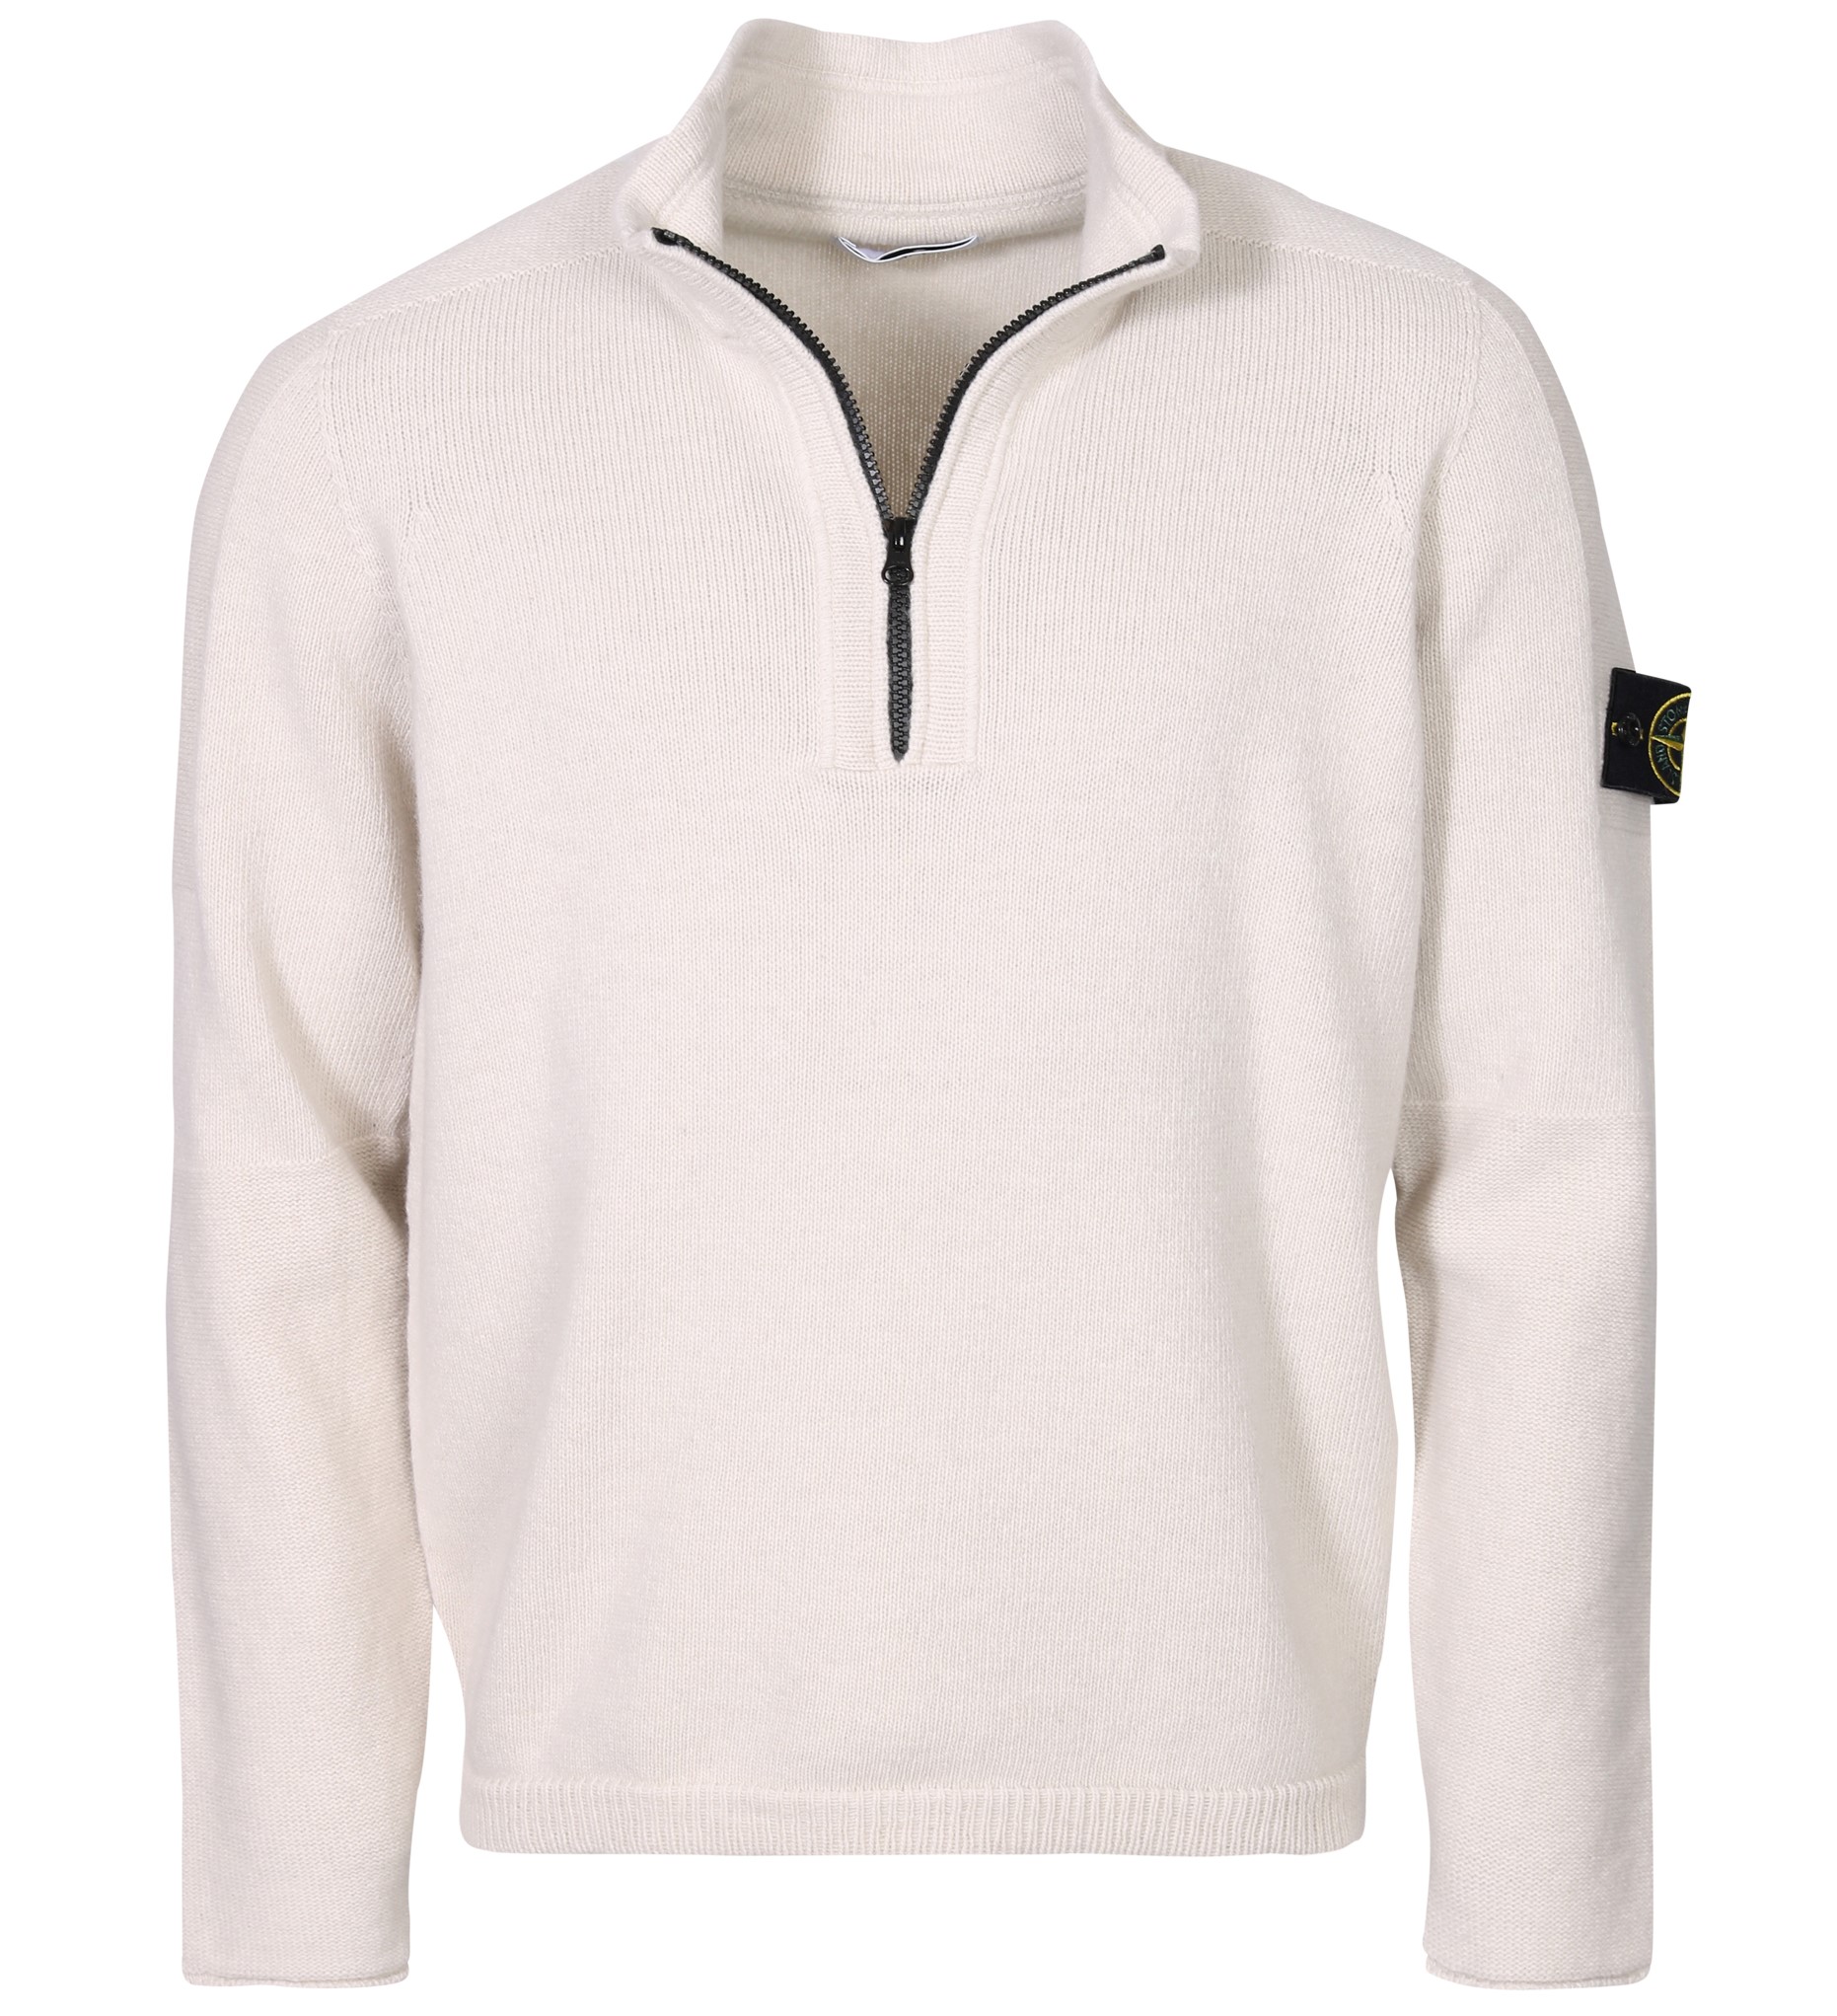 STONE ISLAND Halfzip Knit Sweater in Cement